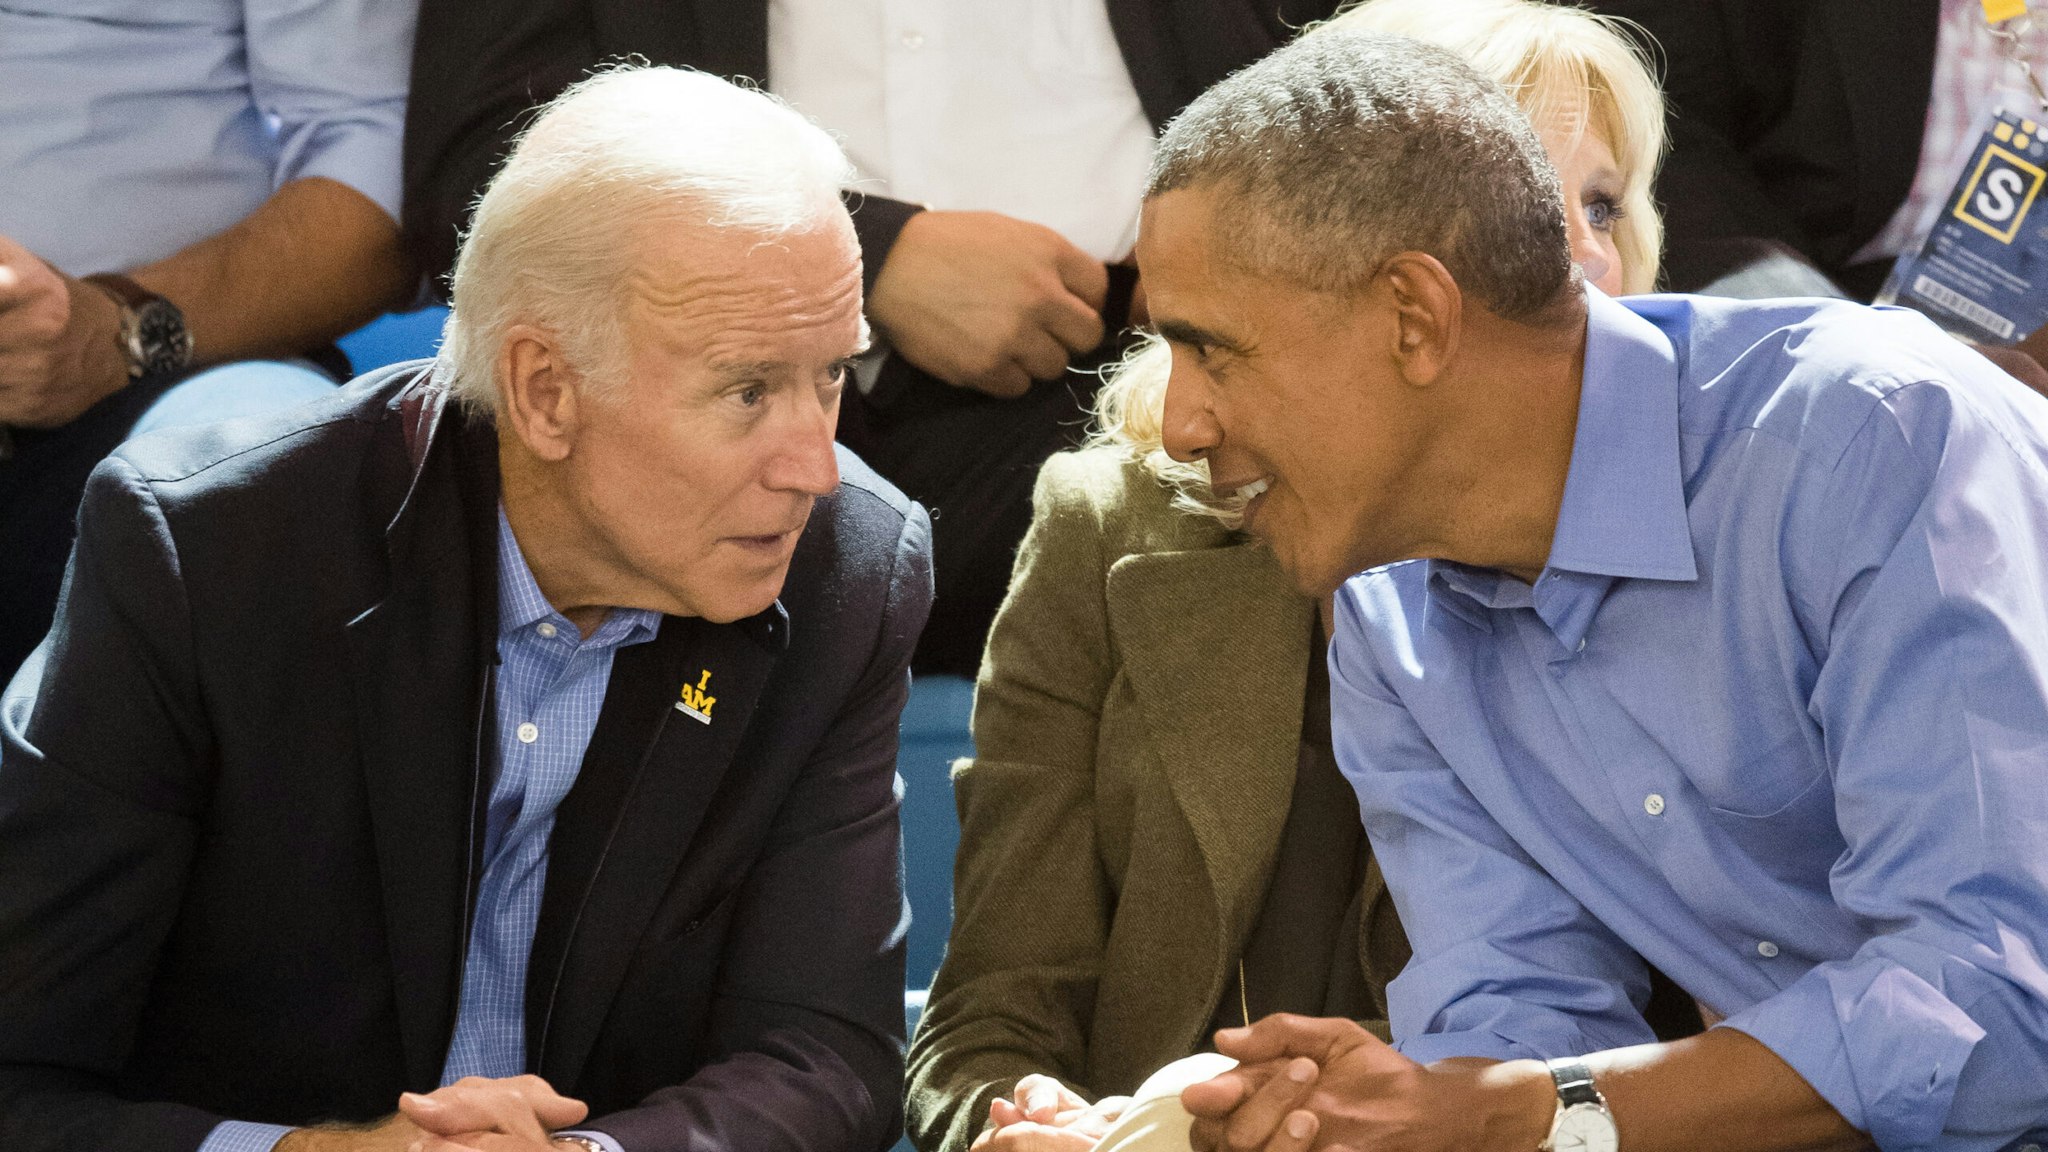 TORONTO, ON - SEPTEMBER 29: Joe Biden and Barack Obama watch the wheelchair basketball on day 7 of the Invictus Games Toronto 2017 on September 29, 2017 in Toronto, Canada. The Games use the power of sport to inspire recovery, support rehabilitation and generate a wider understanding and respect for the Armed Forces.